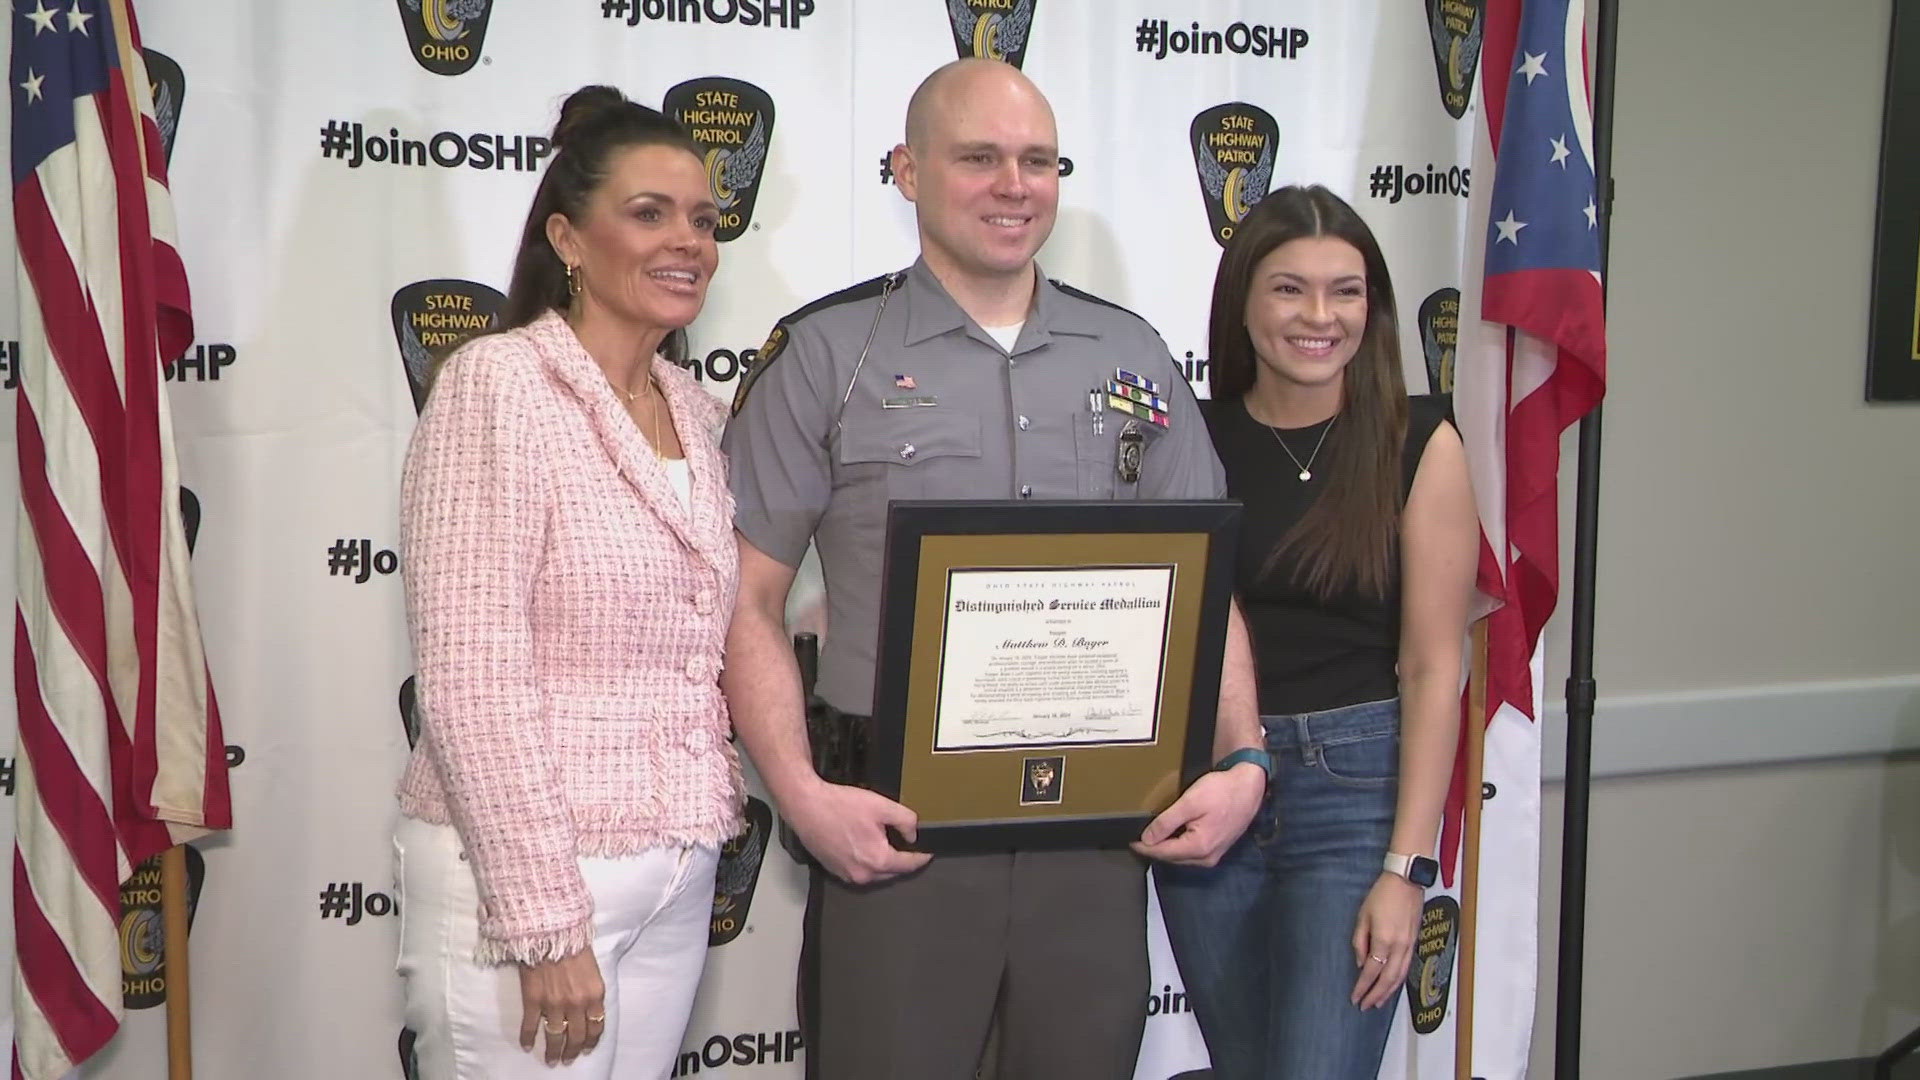 Ohio State Highway Patrol Trooper Matthew Boyer was recognized for saving the life of a gunshot wound victim in Akron earlier this year.